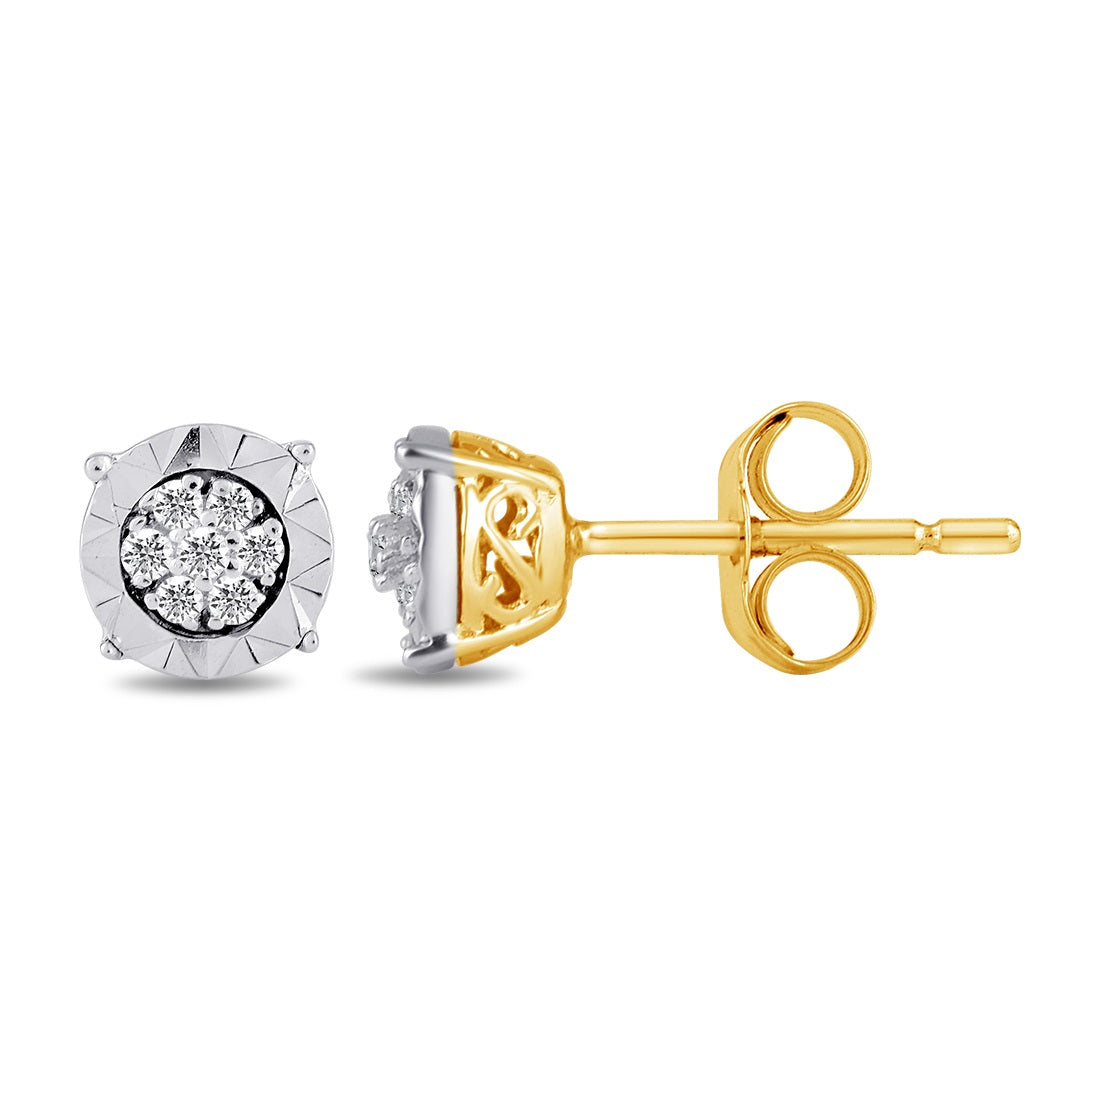 Tia Miracle Halo Diamond Composite Earrings in 9ct Yellow Gold Earrings Bevilles 